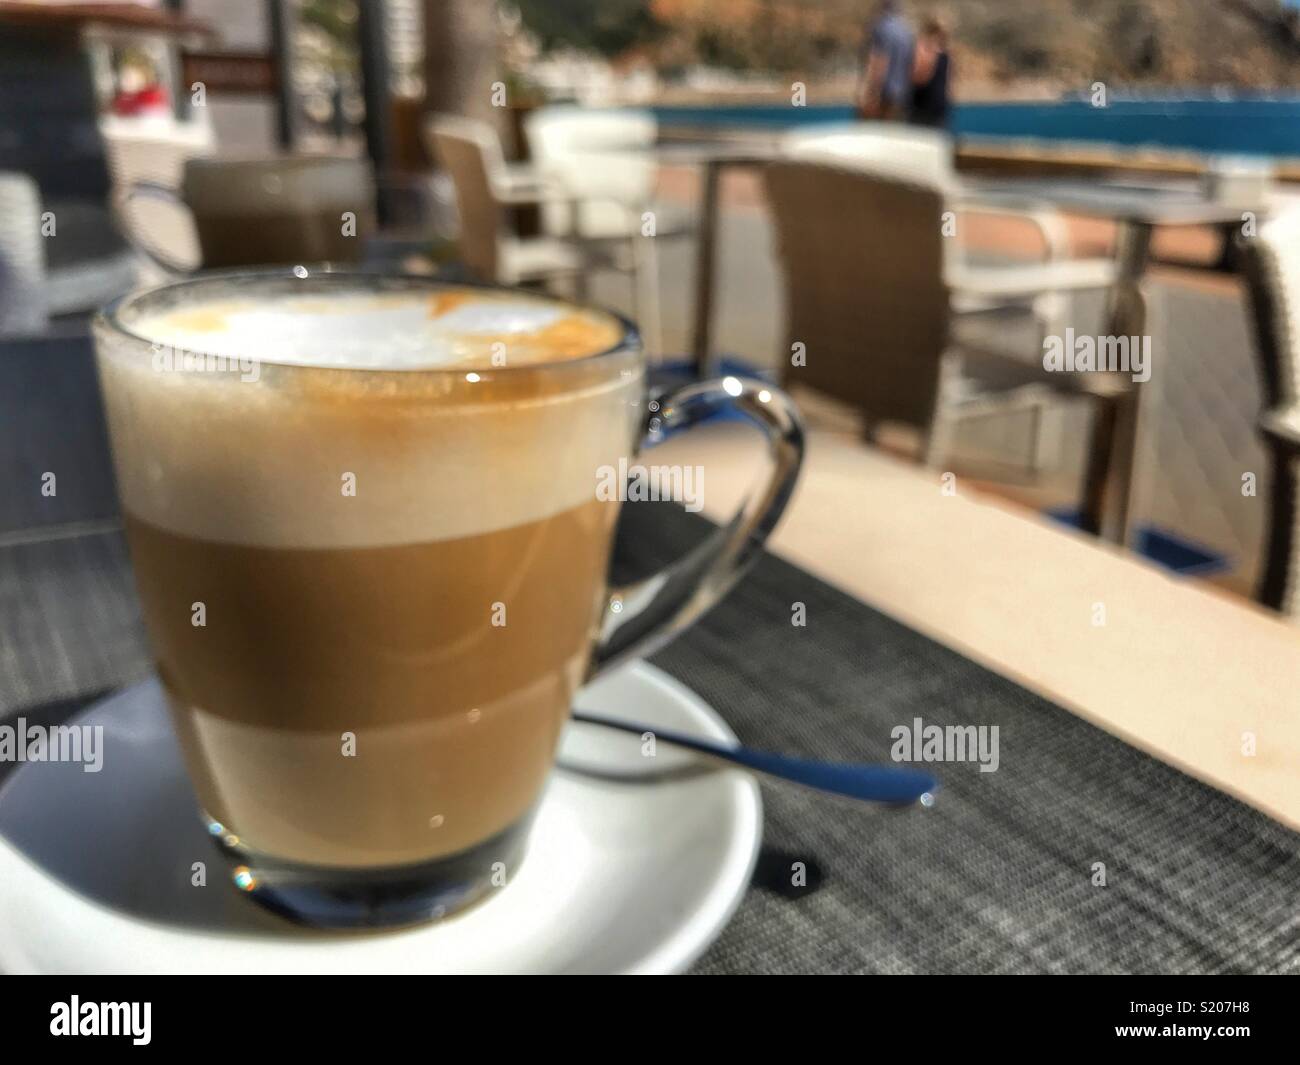 https://c8.alamy.com/comp/S207H8/cafe-con-leche-milky-white-coffee-on-a-table-in-a-cafe-on-the-waterfront-promenade-in-the-port-area-of-javea-xabia-on-the-costa-blanca-alicante-province-comunidad-valenciana-spain-S207H8.jpg